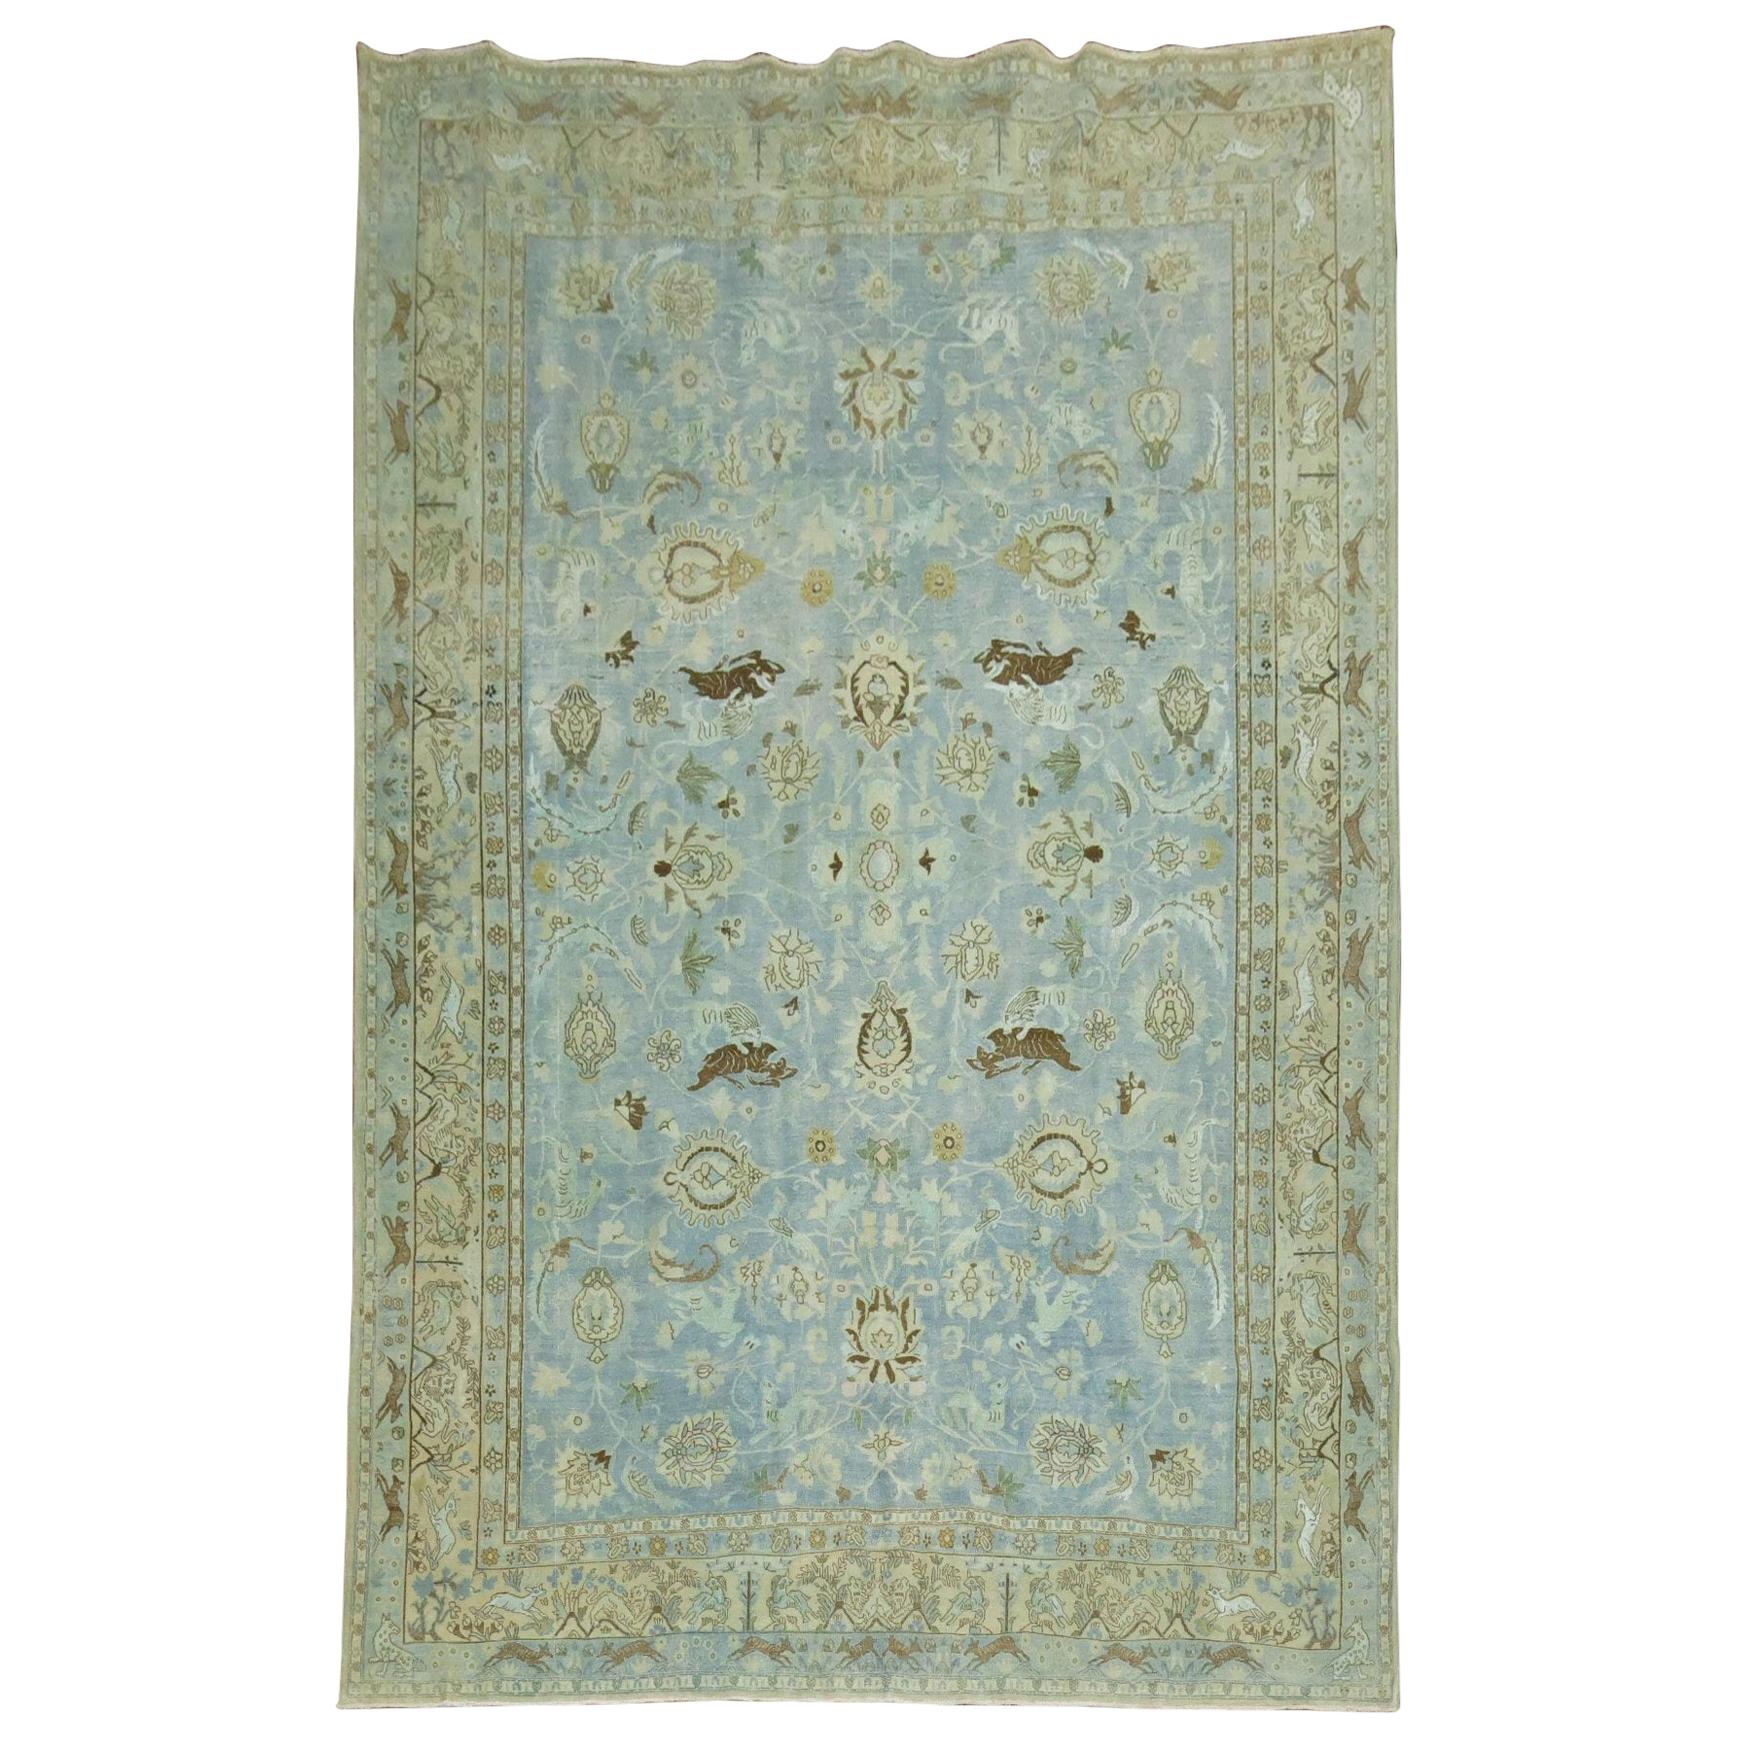 early 20th century Persian Tabriz Pictorial rug in predominant light blue featuring a flurry of animals floating in field and border. majority of the animals look like sea horses and reindeers

Measures: 6'8